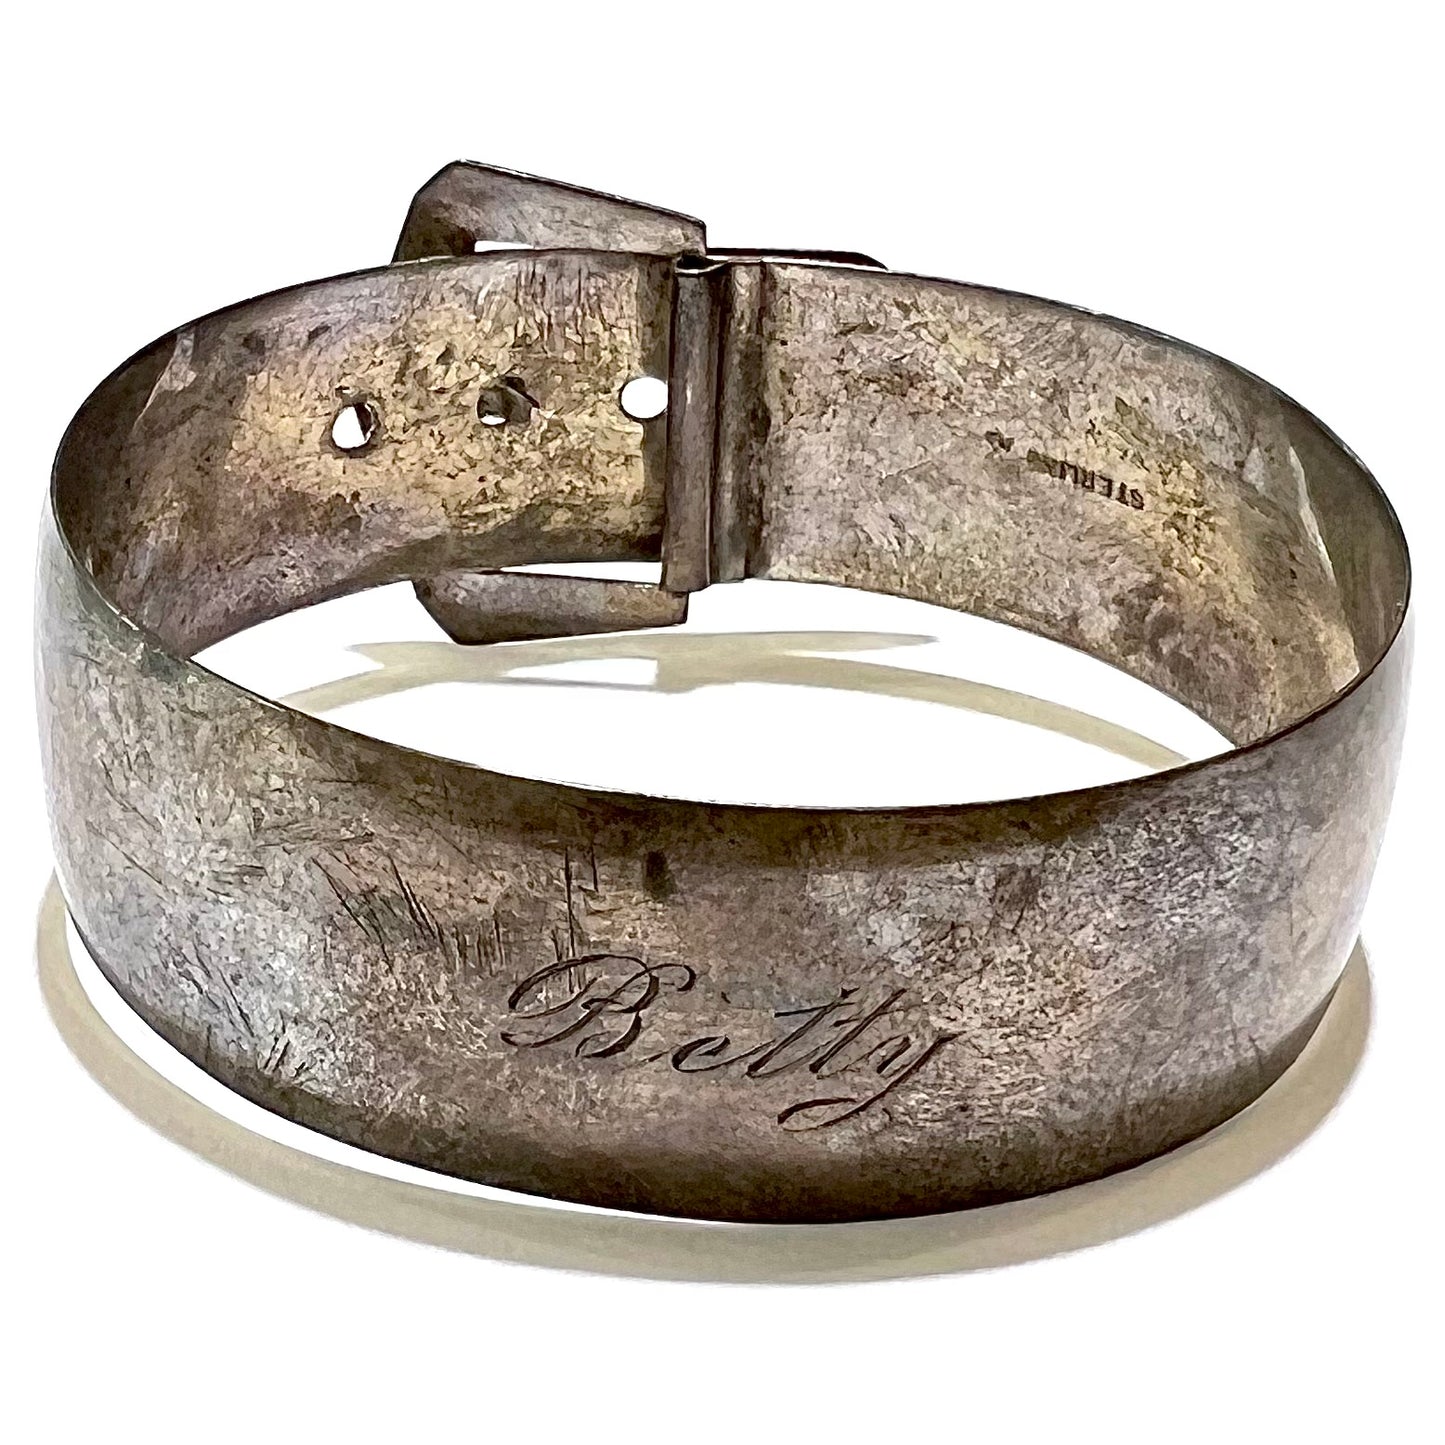 The underside of a worn buckle-motif style metal bracelet.  The word "STERLING" is stamped inside of the piece, and the name "Betty" is engraved in script letters on the bottom outside of the bracelet.